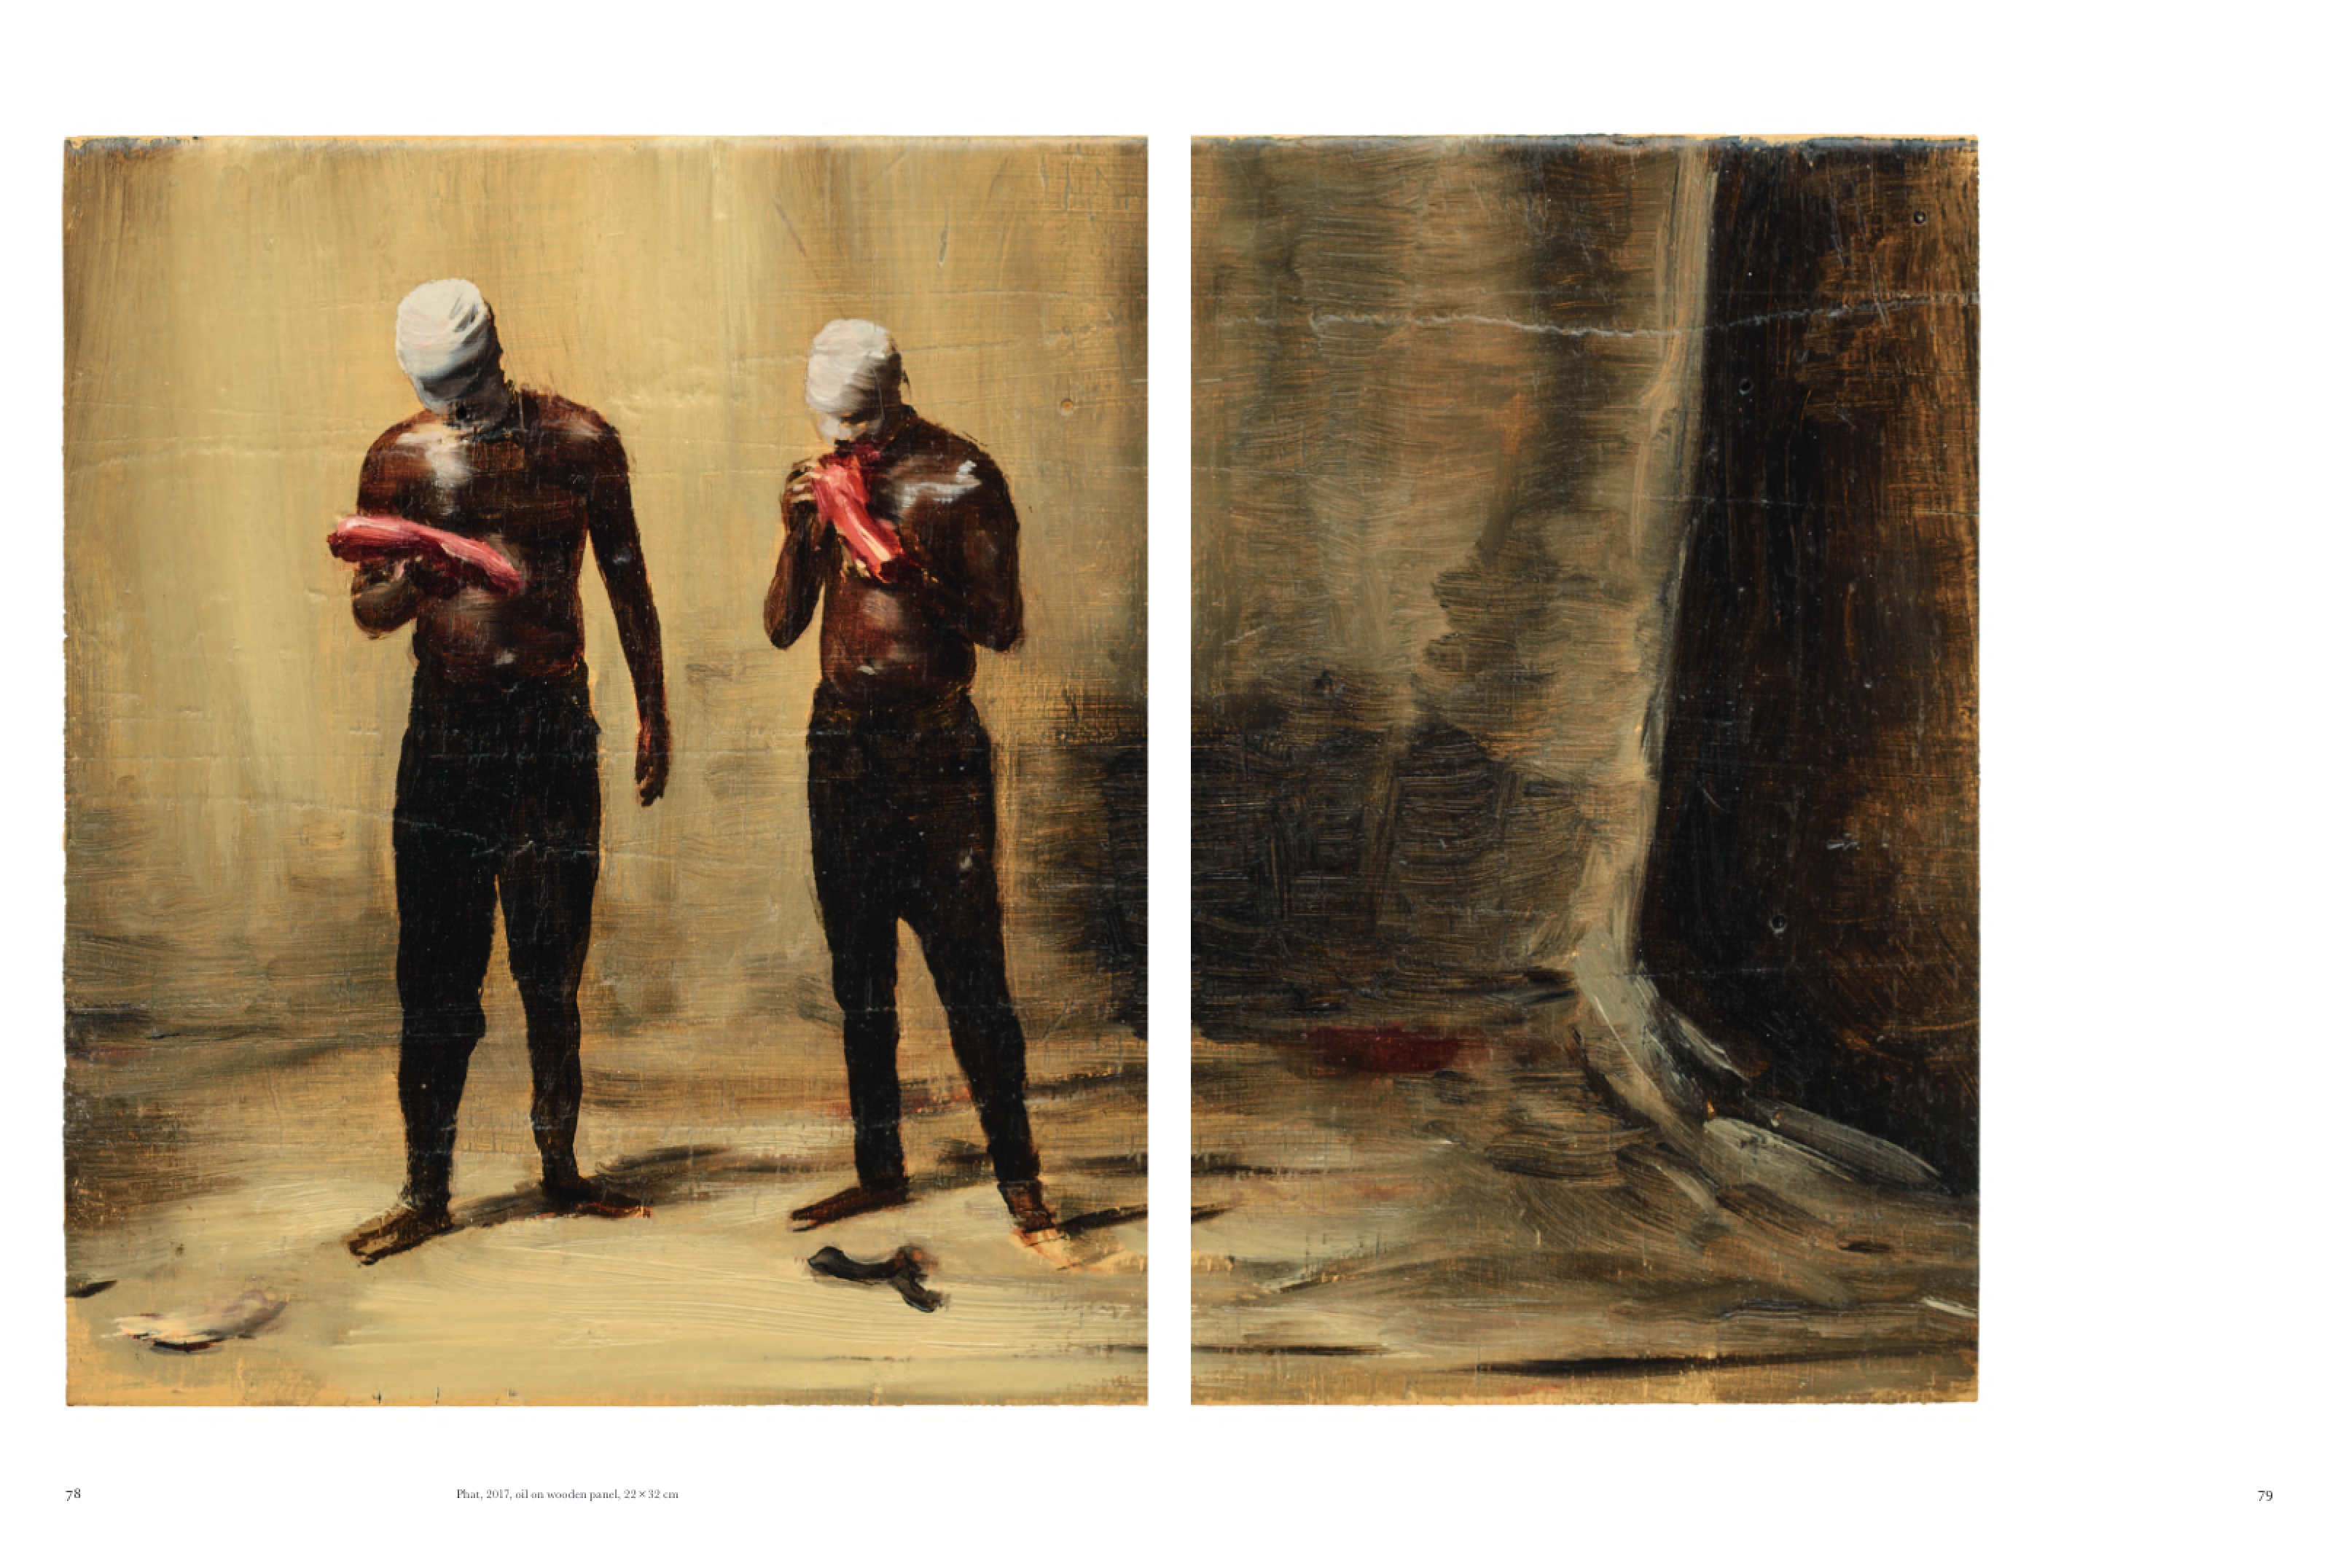 An interior spread from a book titled Michaël Borremans: Badger’s Song, published by Hannibal Books and Franz König Books in 2020.